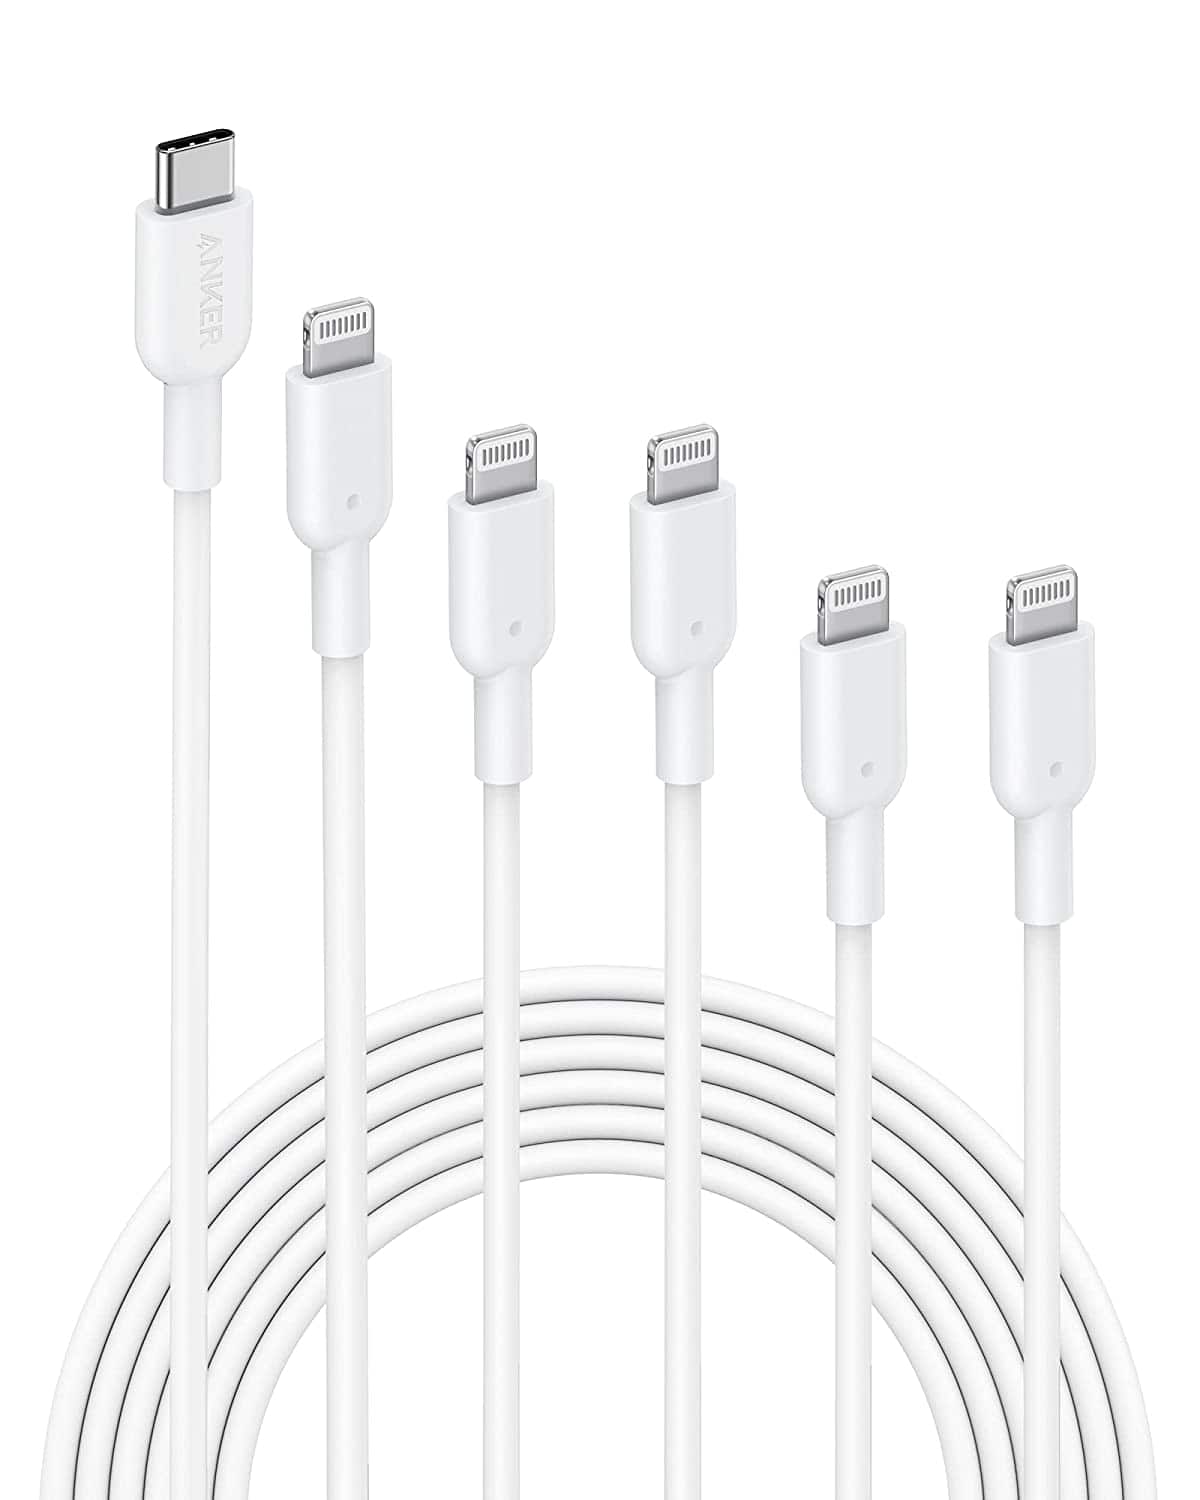 5-Pack Anker USB-C to Lightning Cables (2x 3', 2x 6', 1x 10')